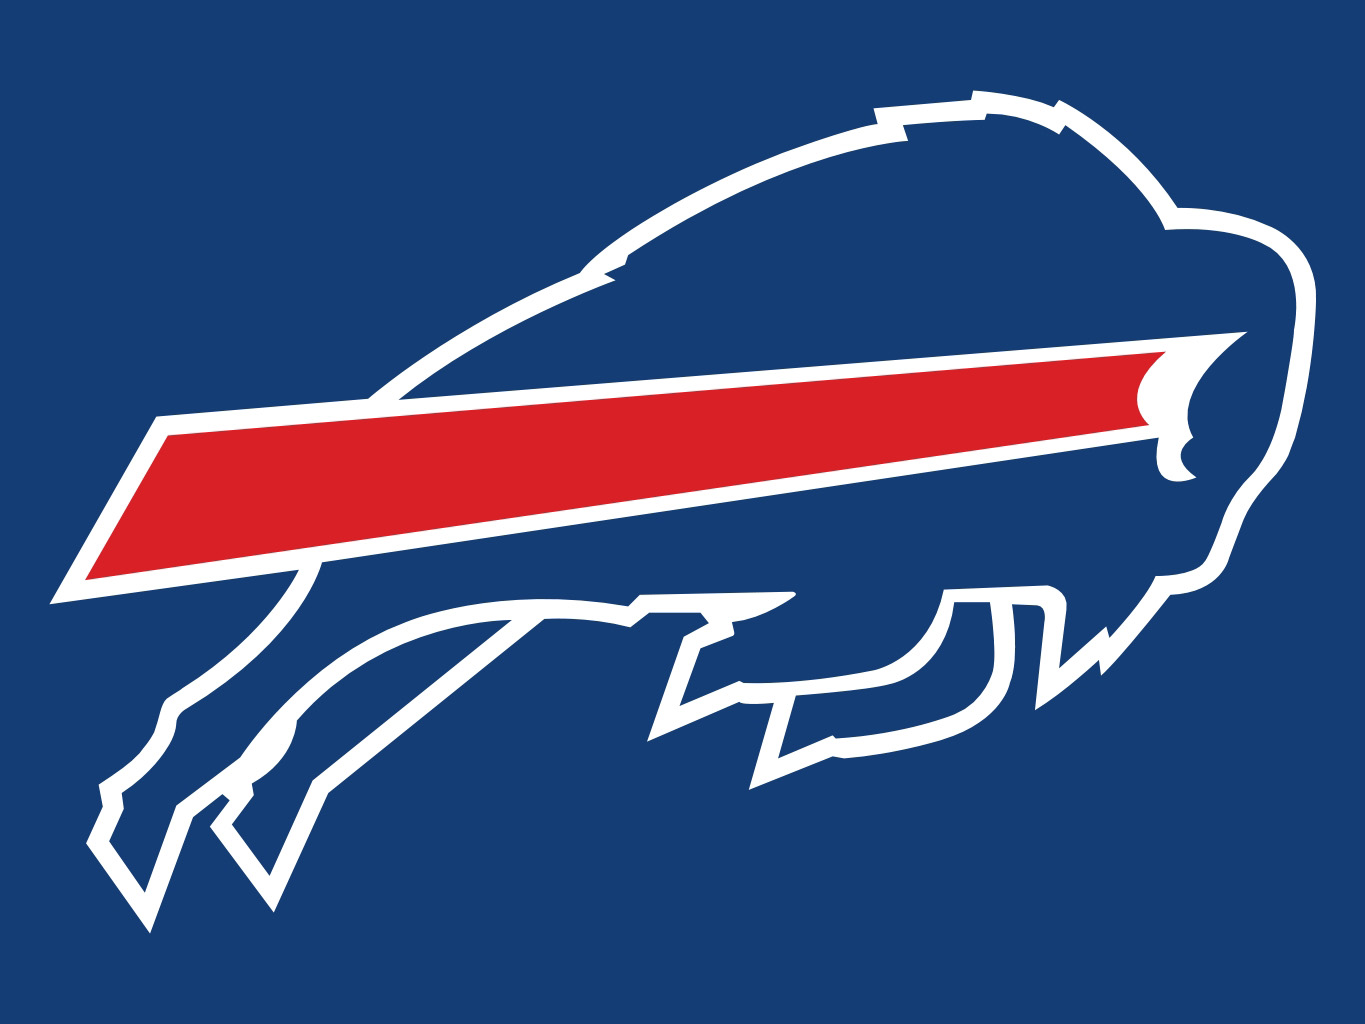 Buffalo Bills None. The Buffalo Jills have suspended their activities after they filed a lawsuit over poor wages and treatment.